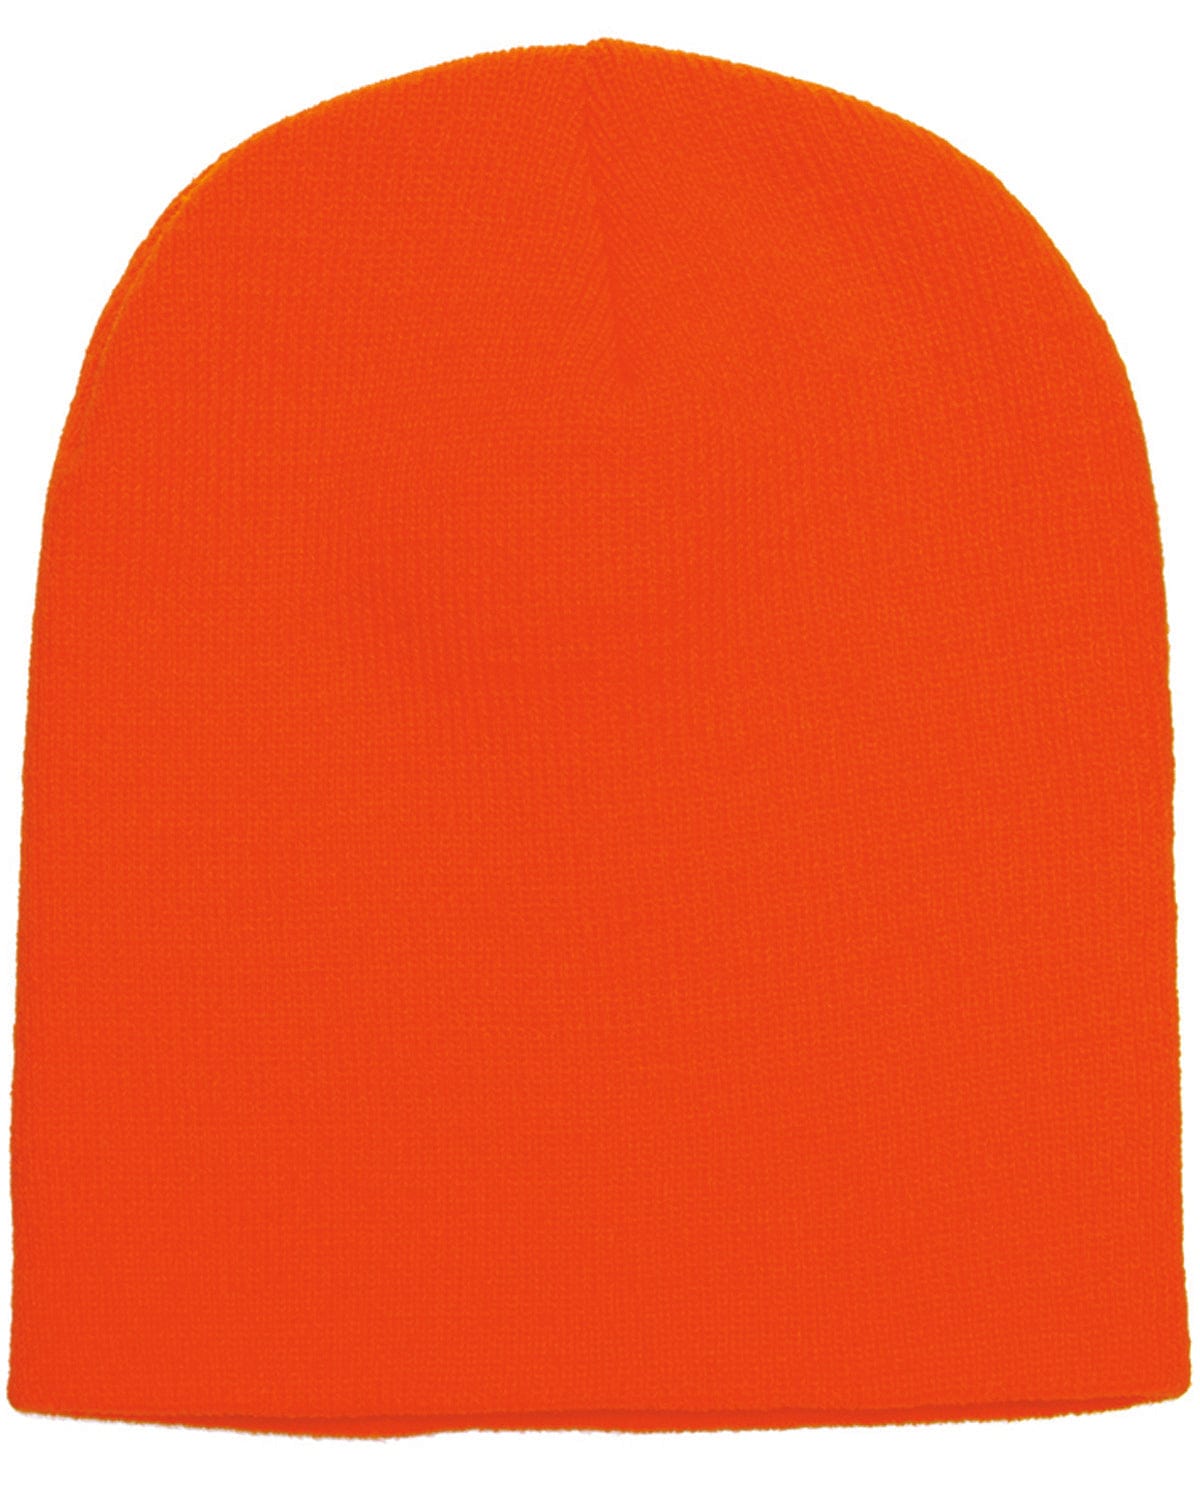 Adult Beanie Knit Yupoong 1500: